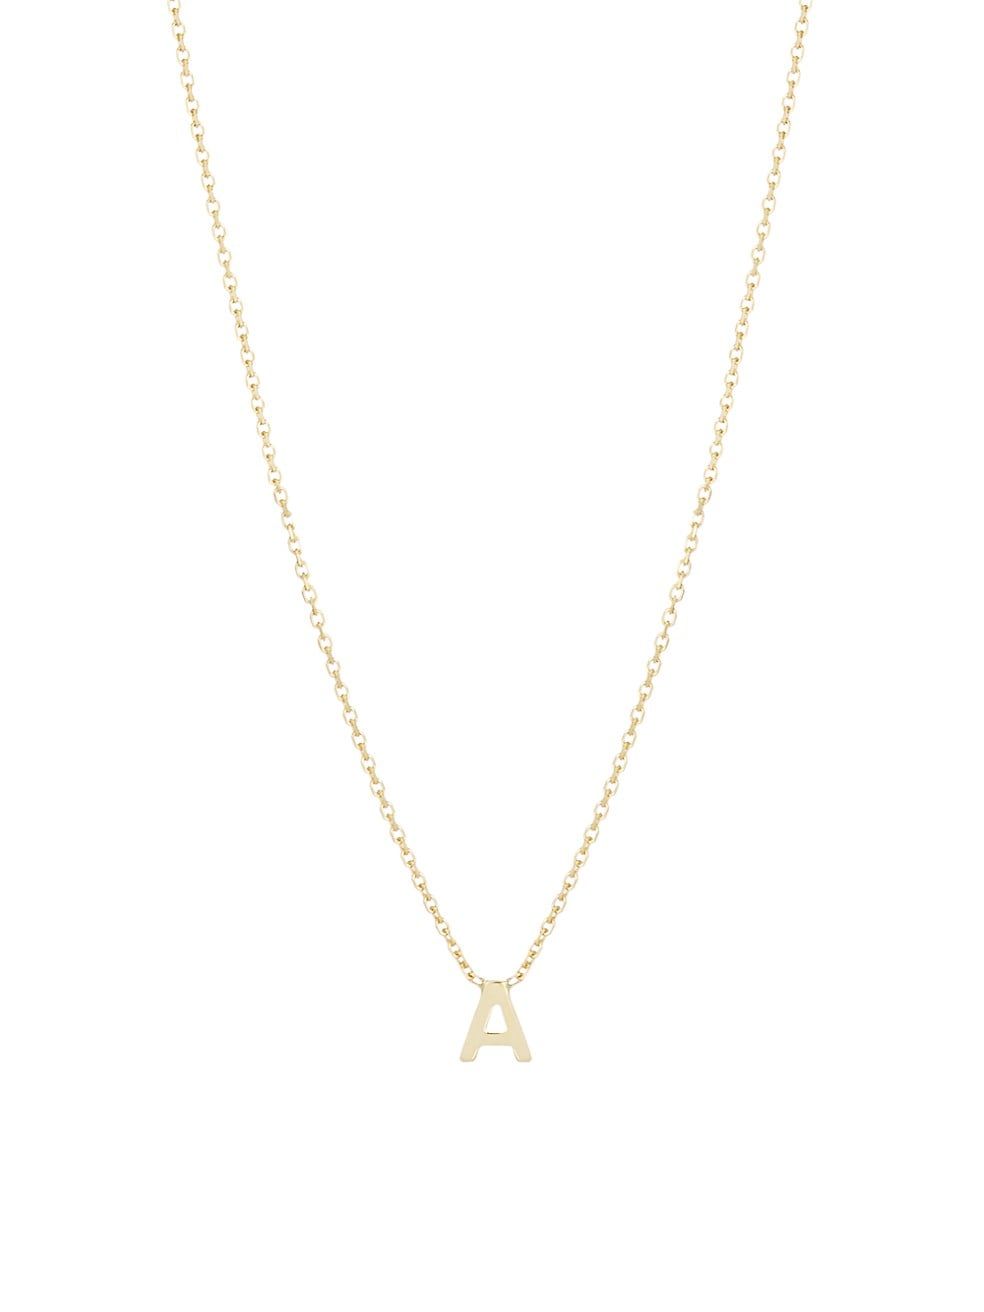 Saks Fifth Avenue Collection 14K Yellow Gold Initial Pendant Necklace | Saks Fifth Avenue